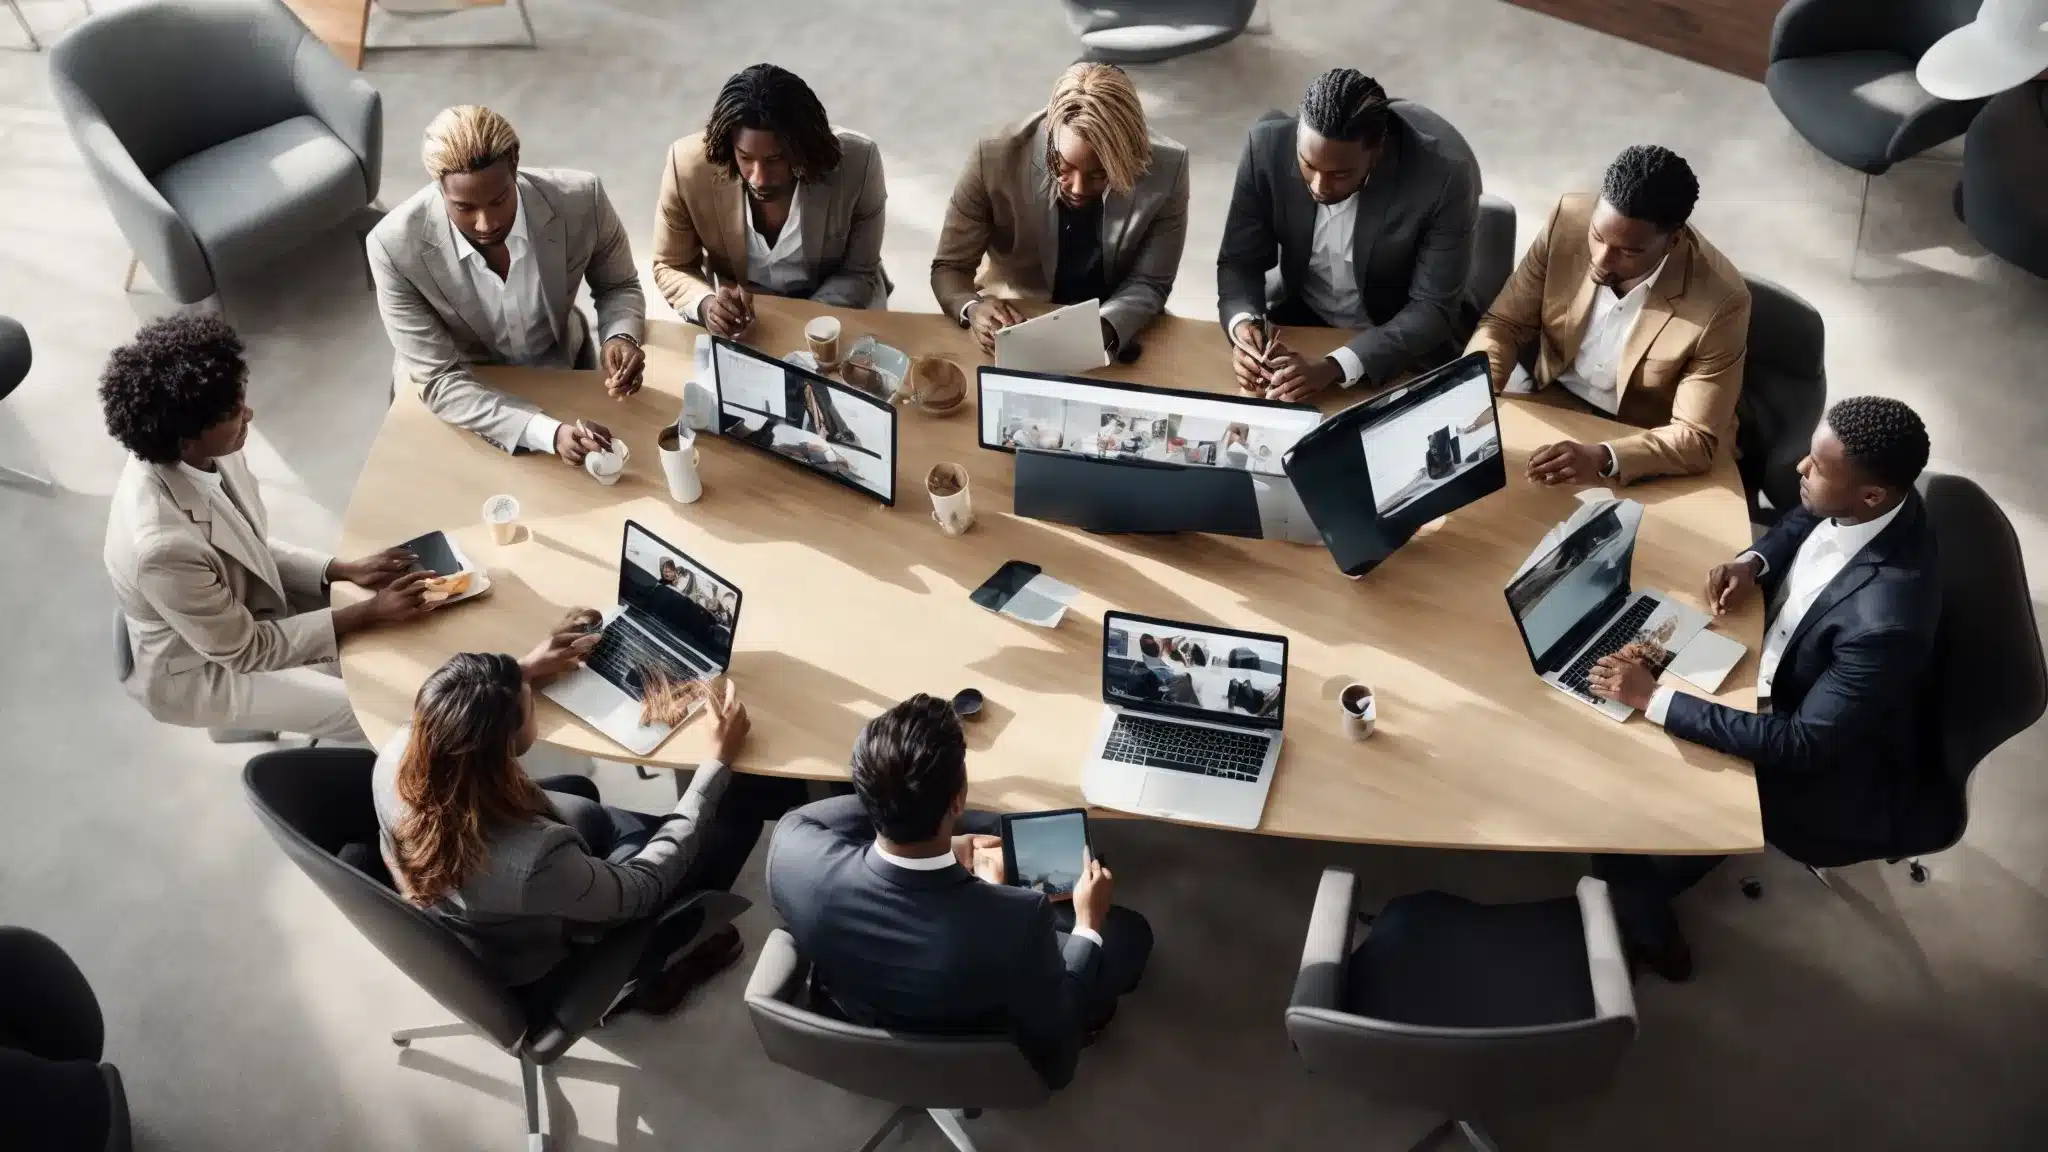 A Diverse Group Of Professionals Gather Around A Modern Conference Table With Digital Devices, Brainstorming Over A Creative Brand Strategy Concept.